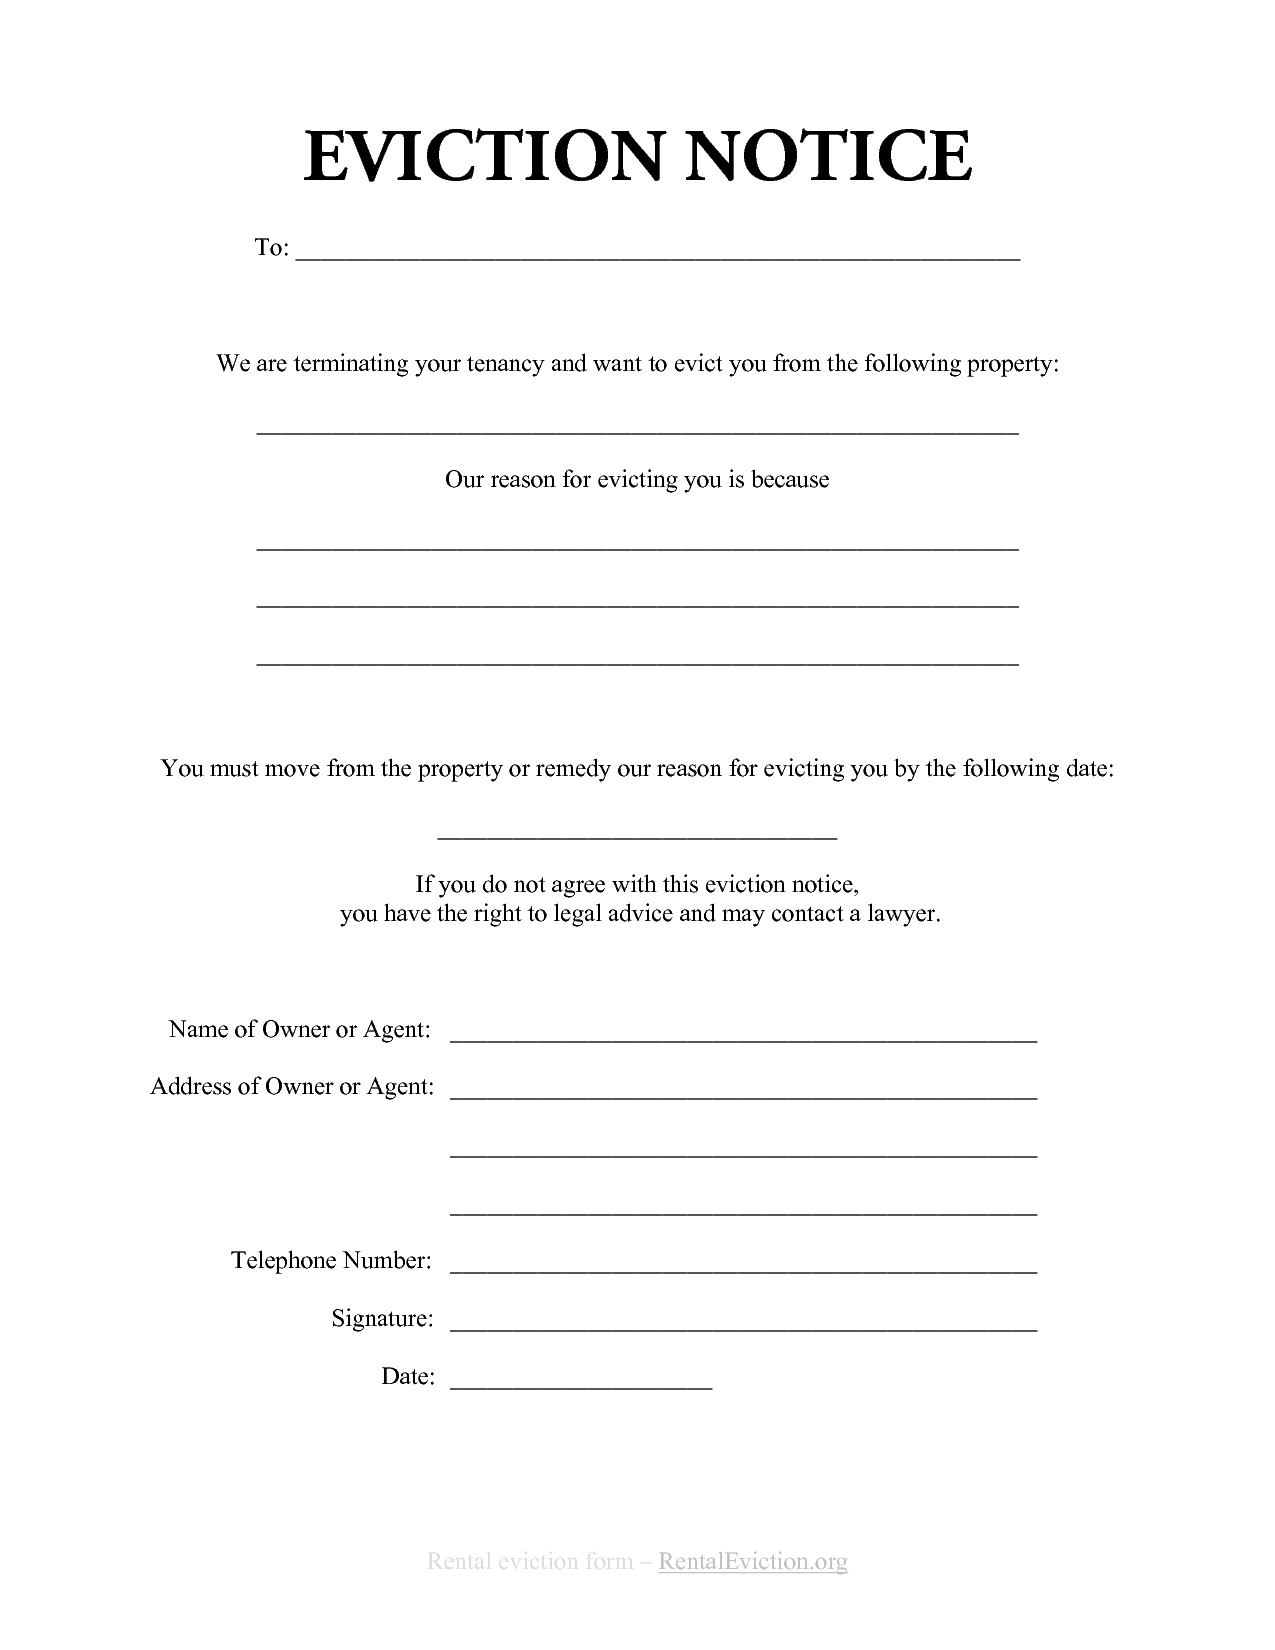 Eviction Letter Template Free - Free Print Out Eviction Notices Free Rental Eviction Notice